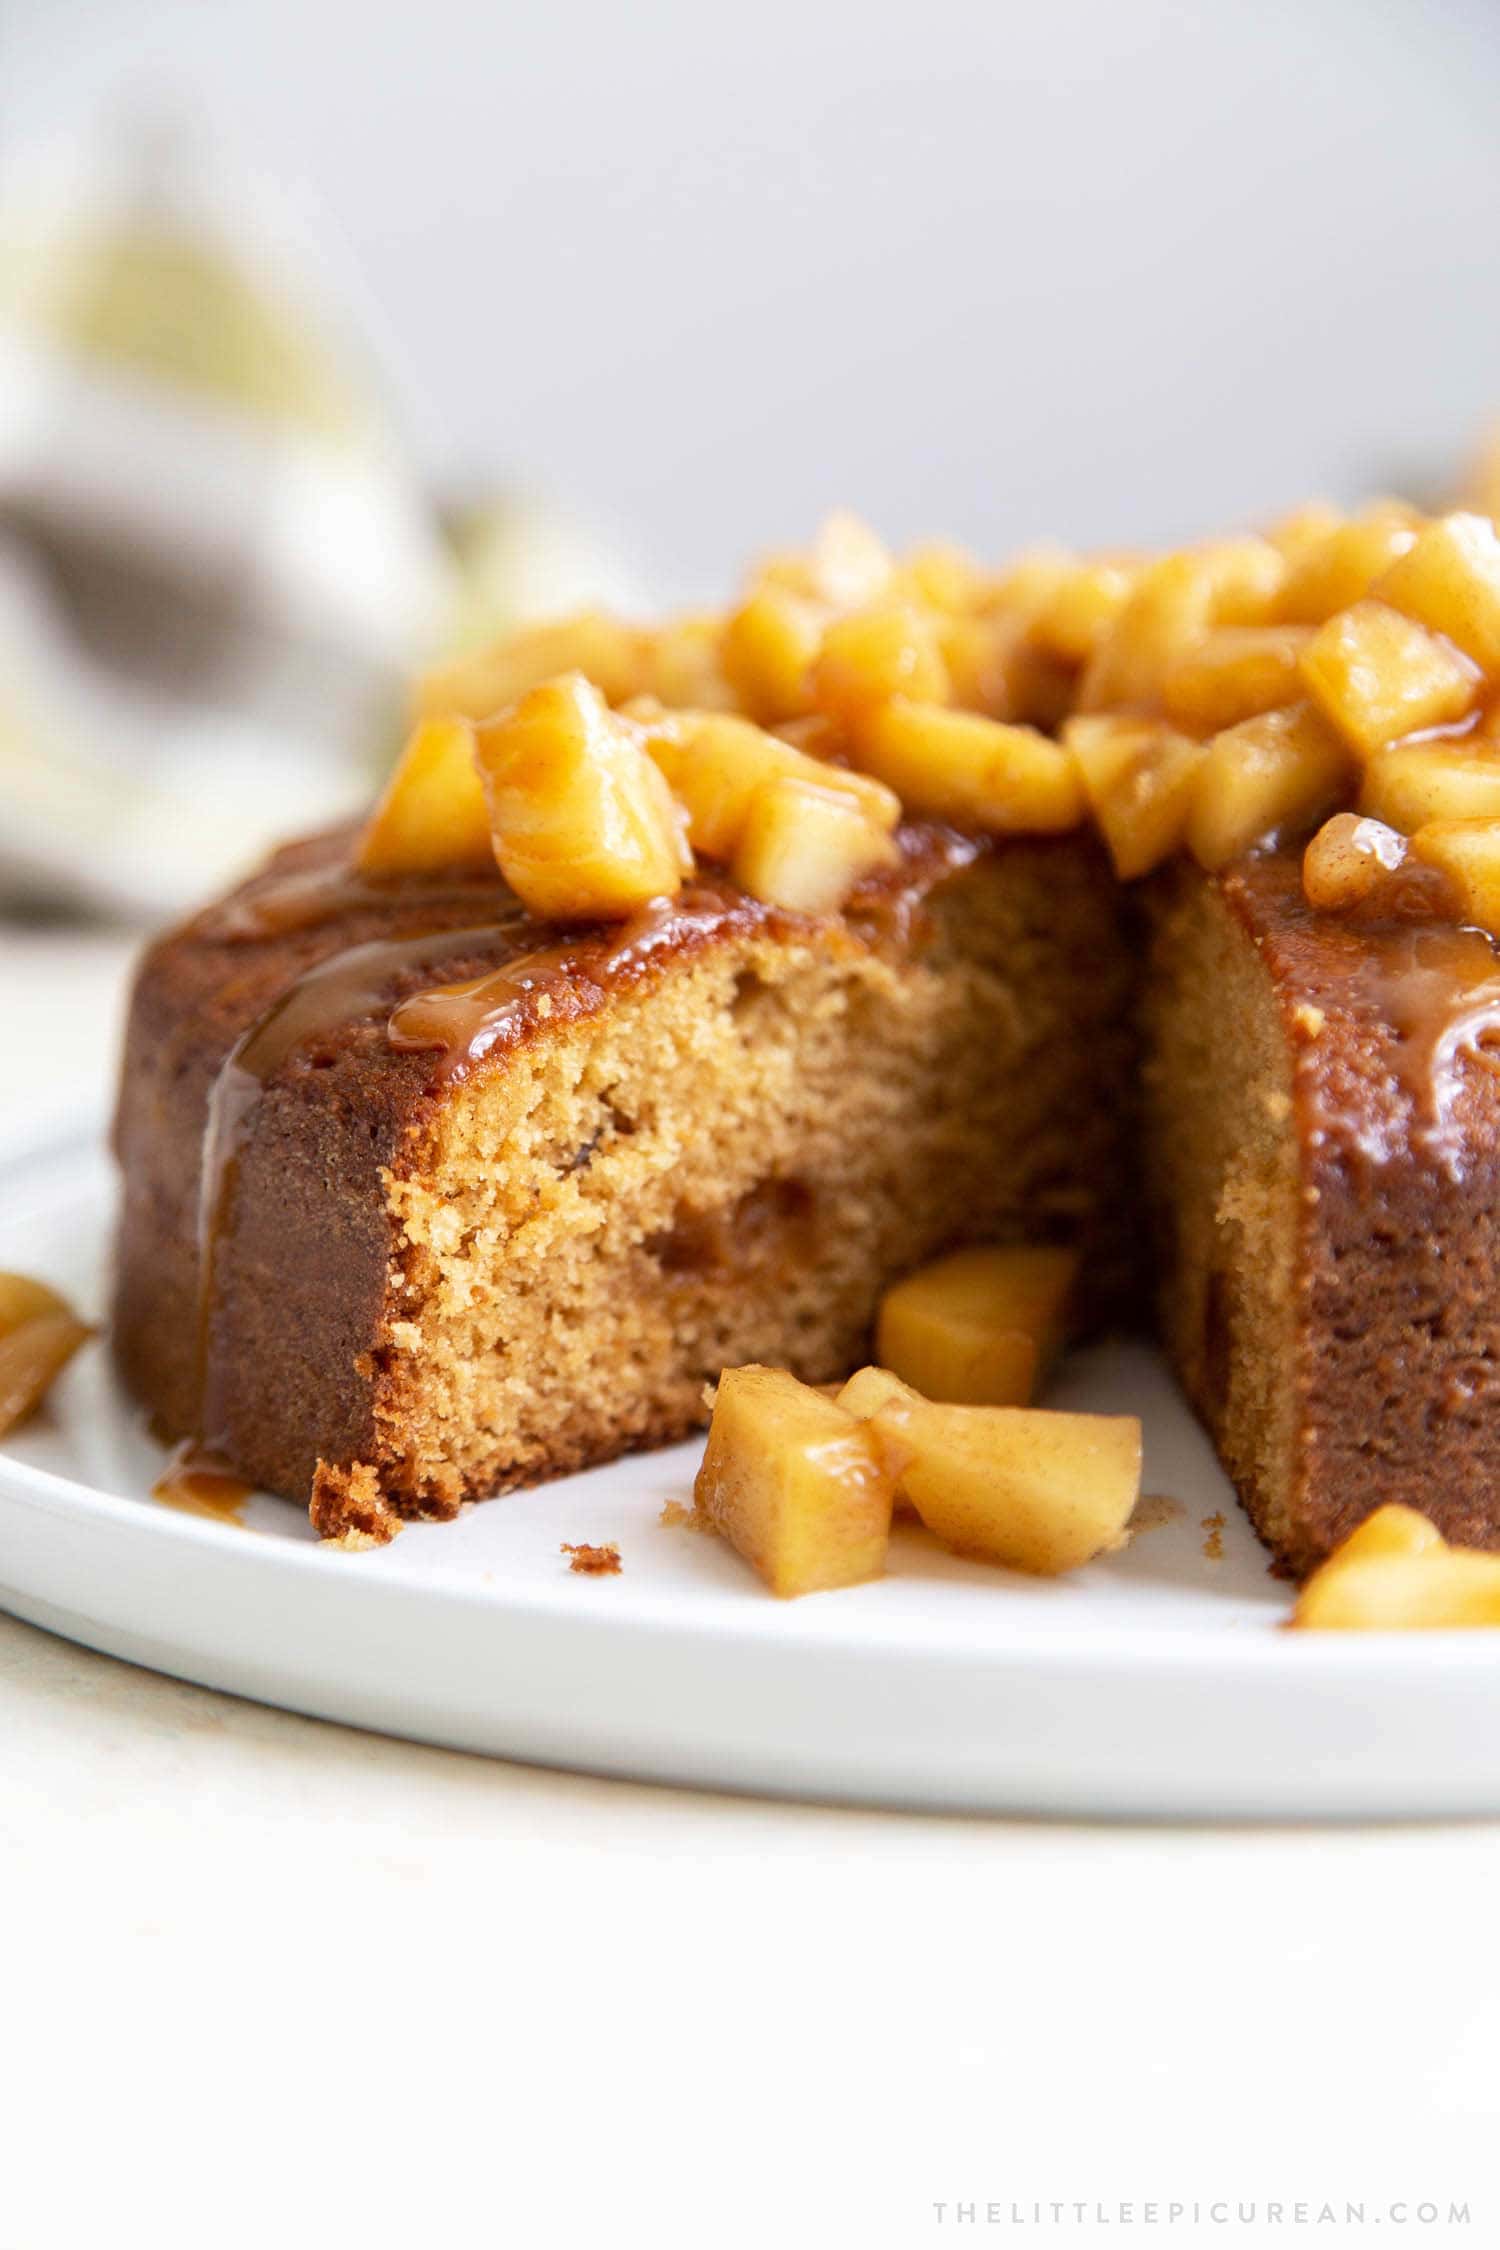 Apple Ginger Cake. Moist ginger cake is flavored with fresh grated ginger and candied ginger pieces. The baked cake is topped with ginger spiced apples and a drizzle of caramel.